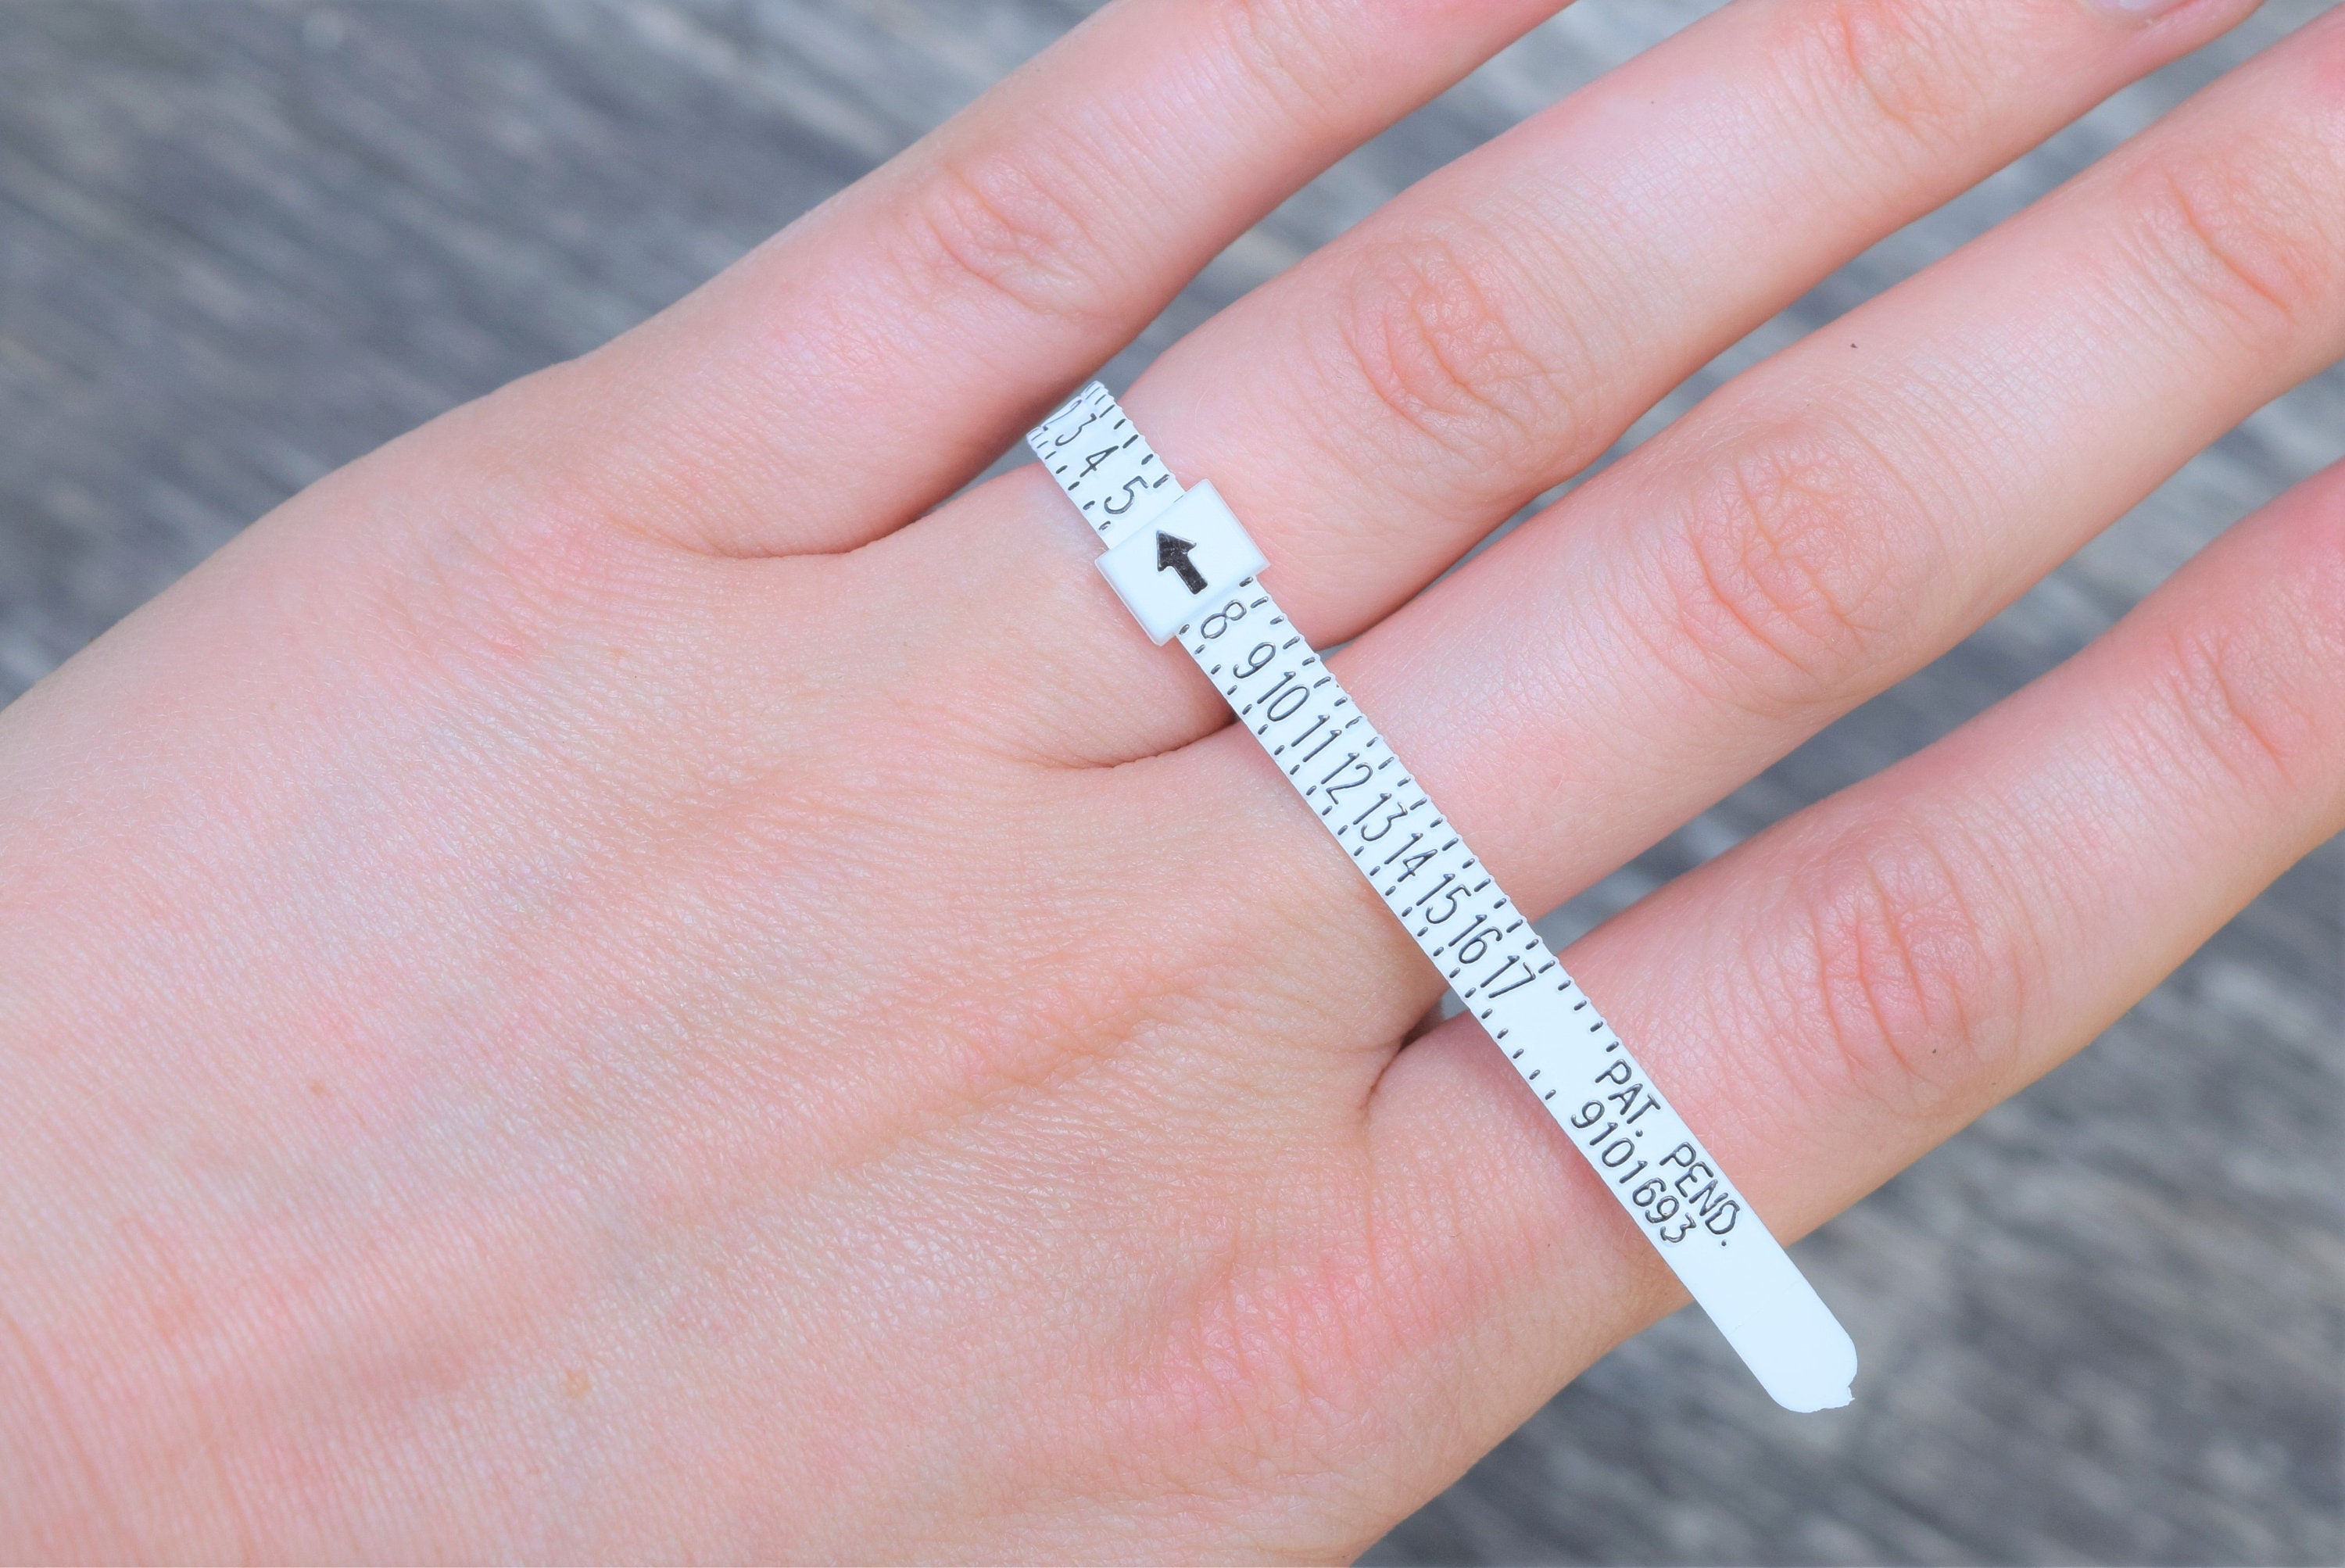 Ring Sizer, Find Ring Size, Adjustable Ring Sizer, Ring Sizer Adjuster,  Measure Ring Size at Home 